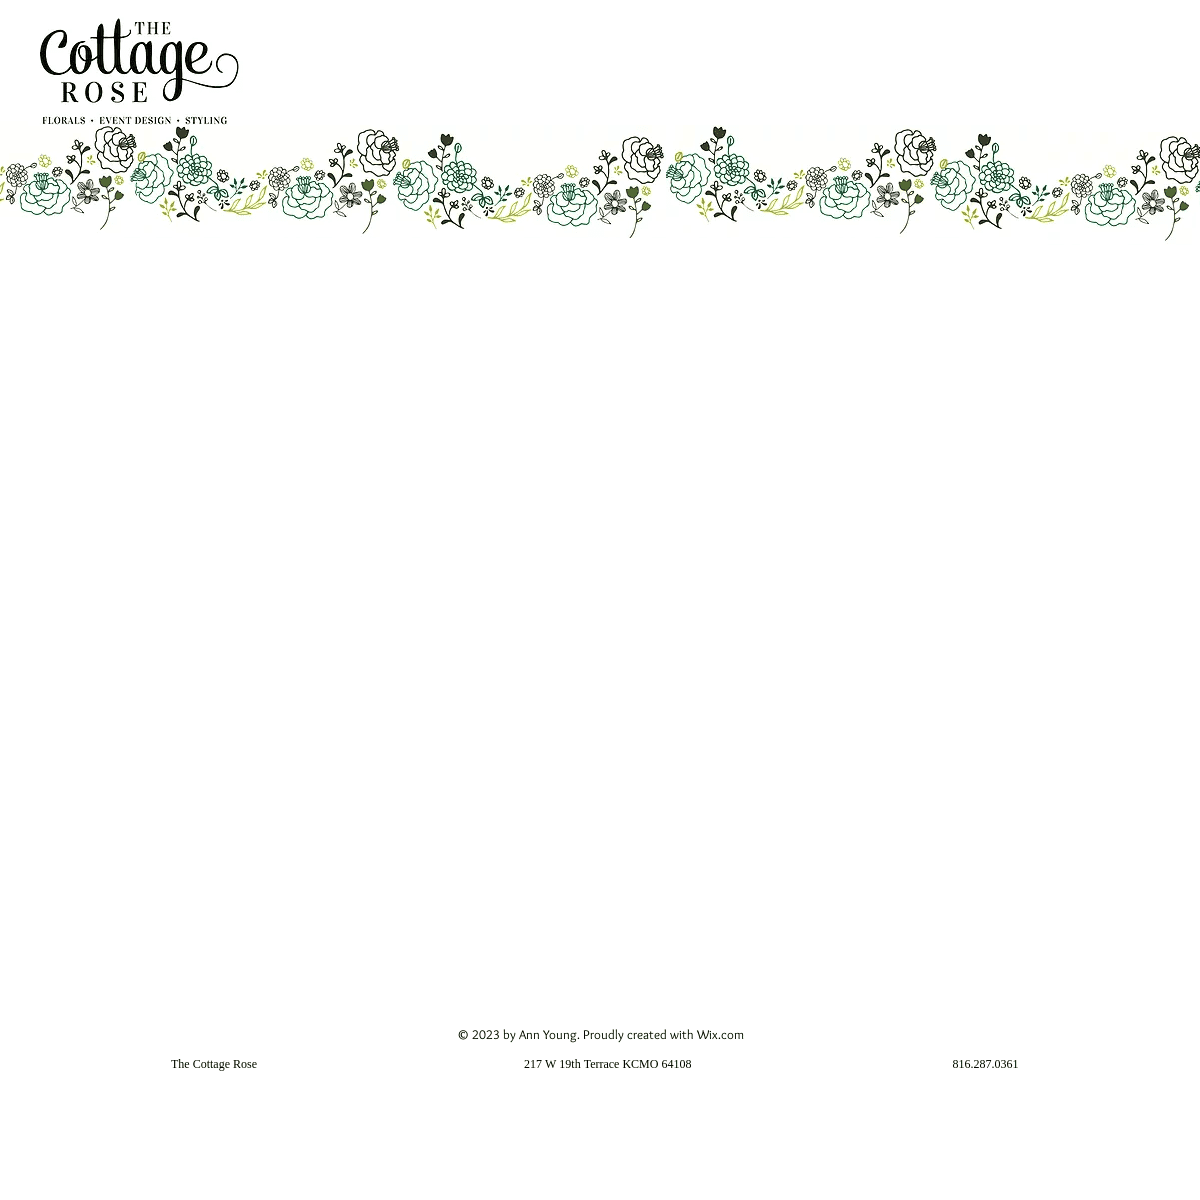 A complete backup of thecottageroseflorals.com